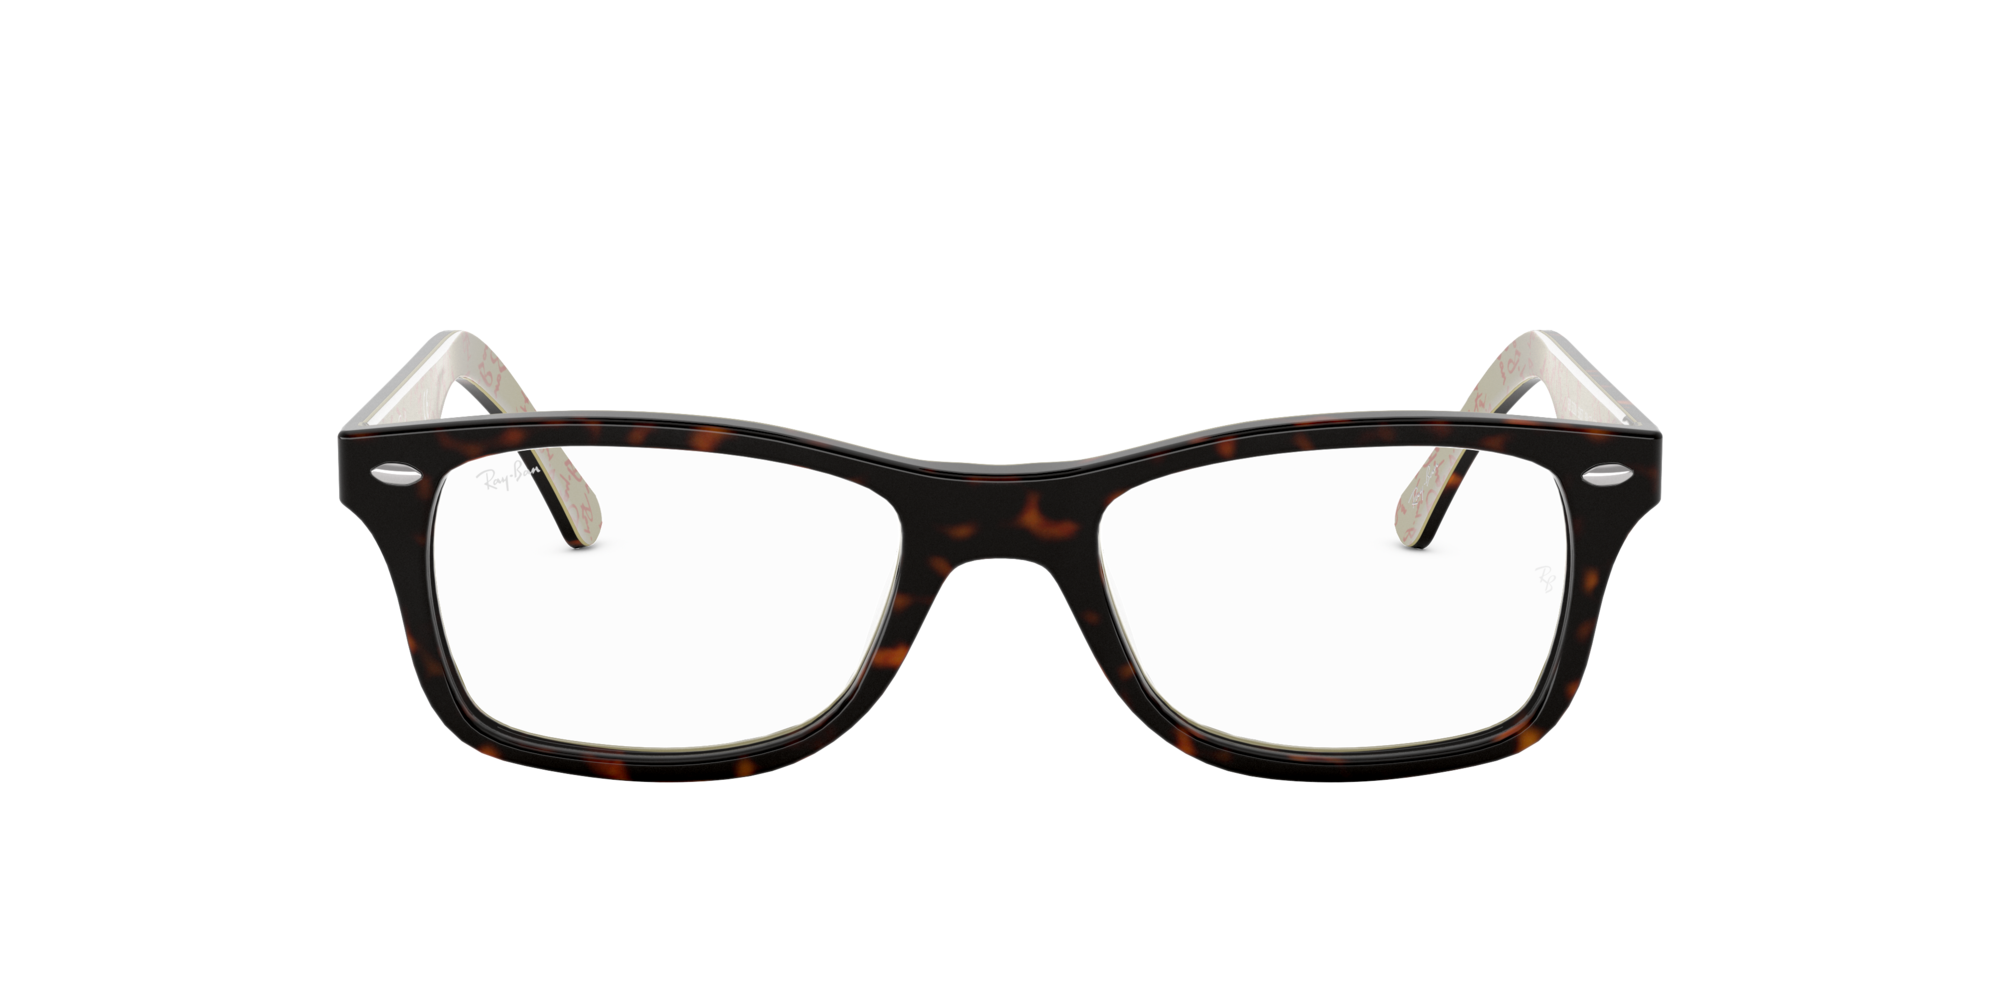 Ray Ban 0rx5228 Glasses In Tortoise Target Optical